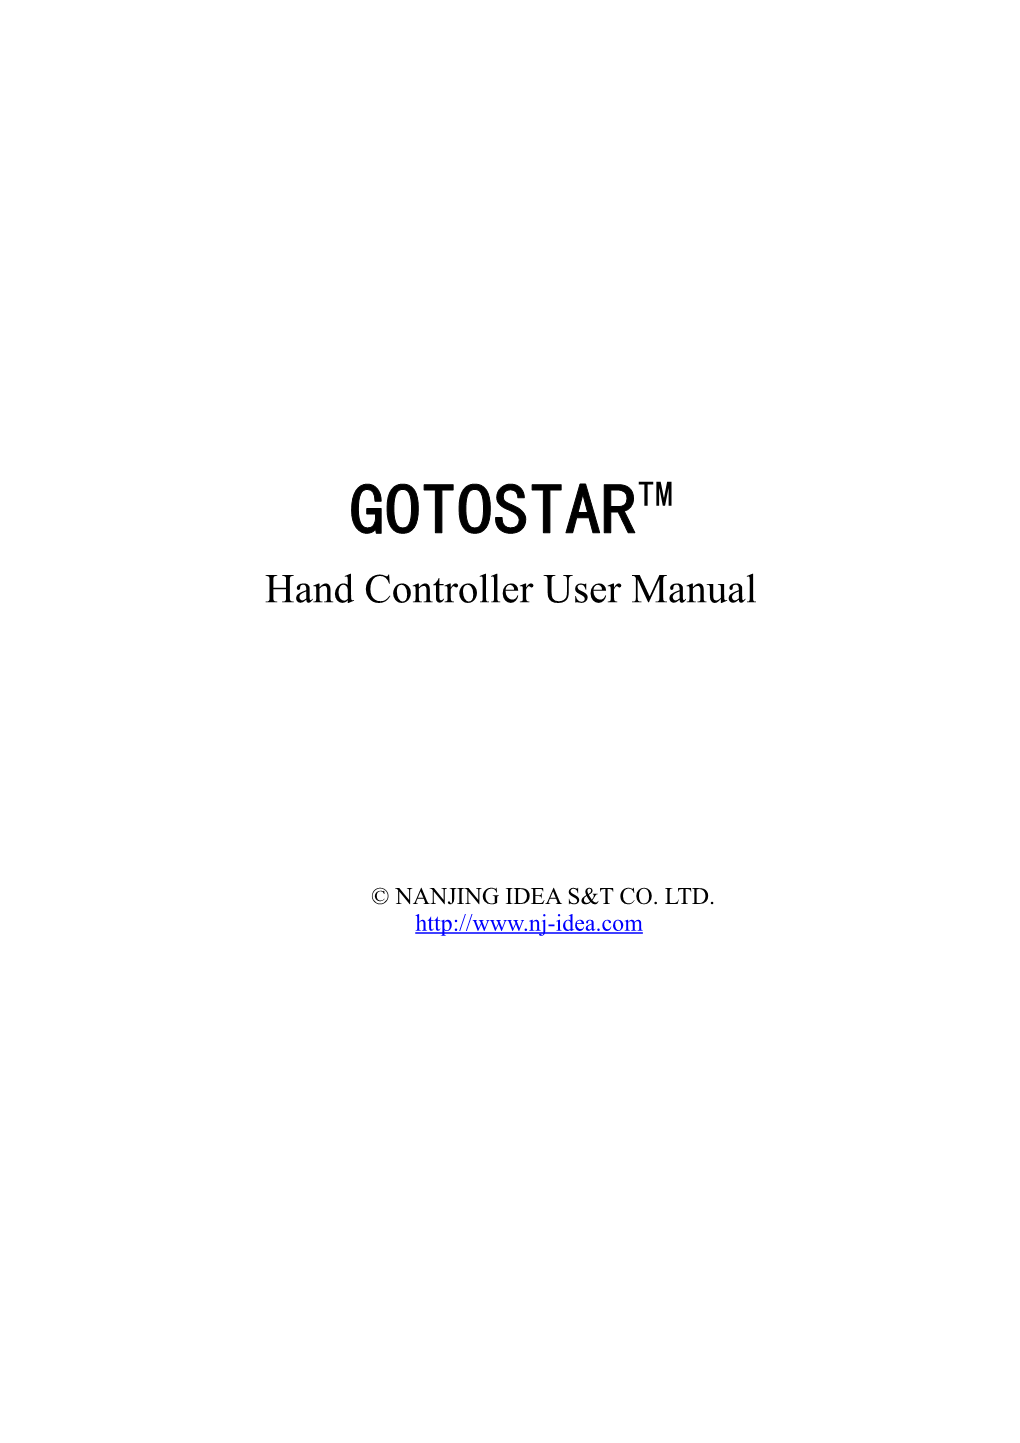 The New GOTOSTAR Hand Controller and Our Specially Designed Two Axis DC Servomotor Driver